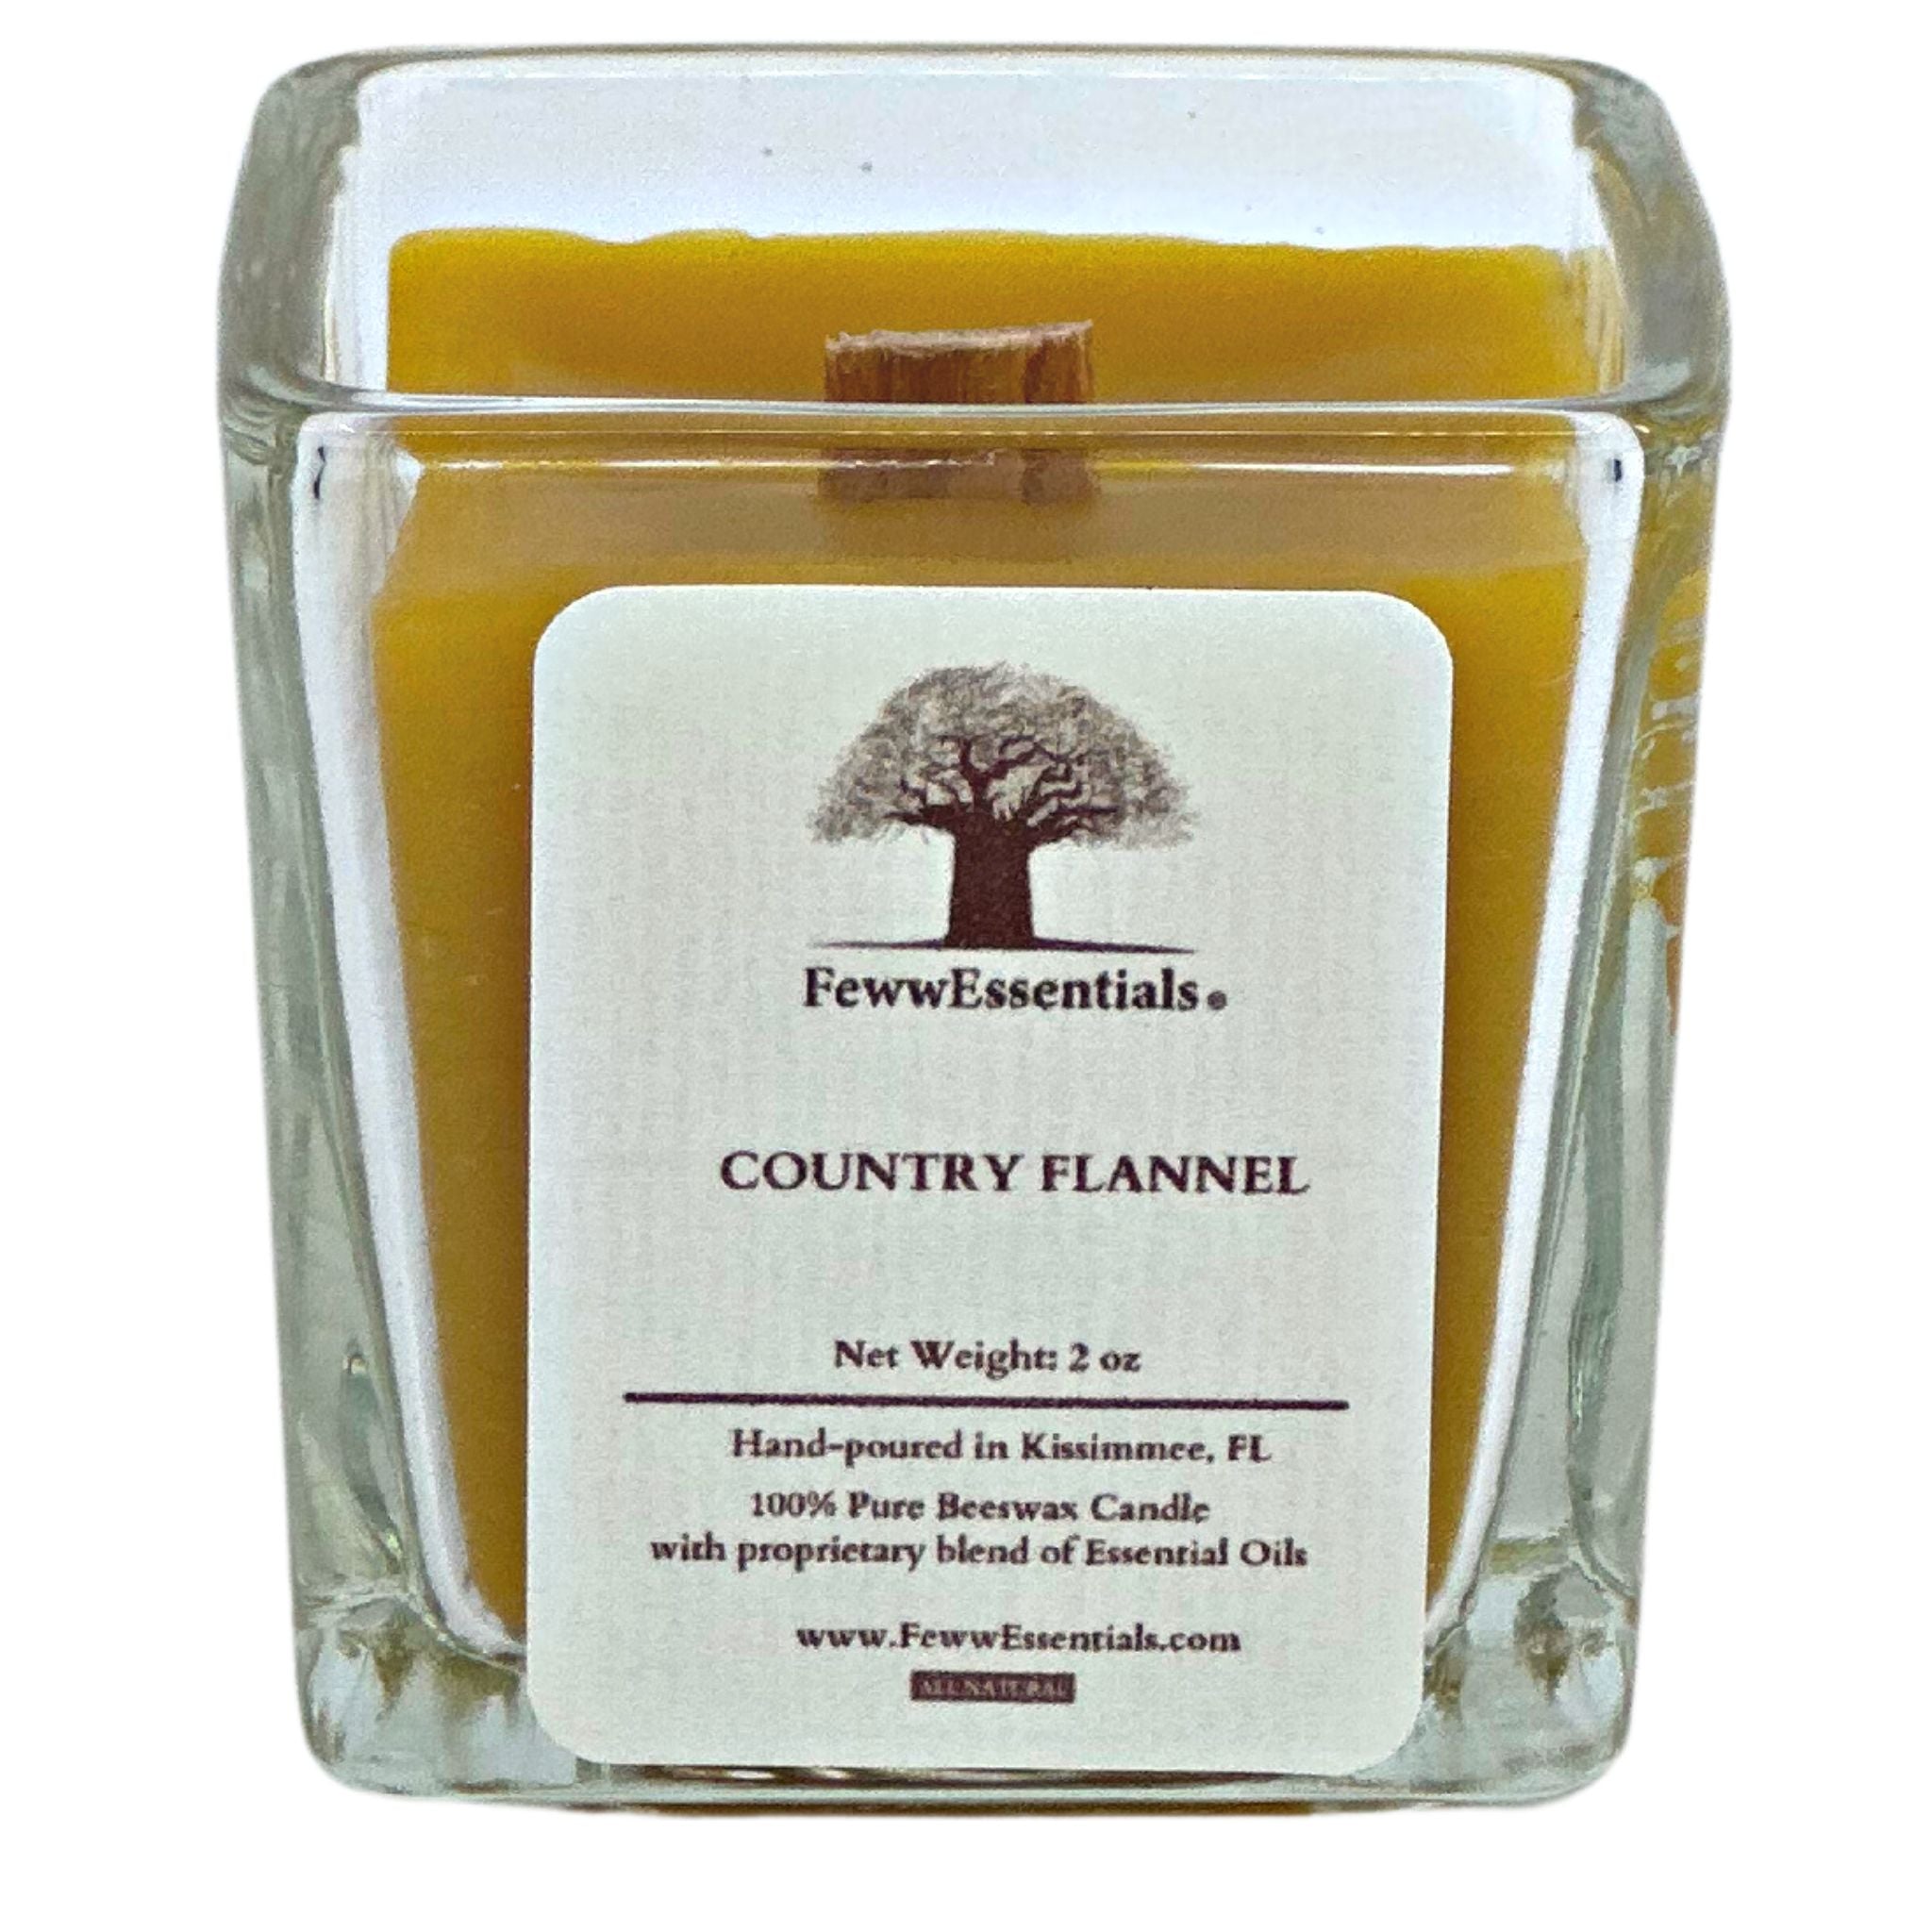 Country Flannel Votive/Tealight Candle